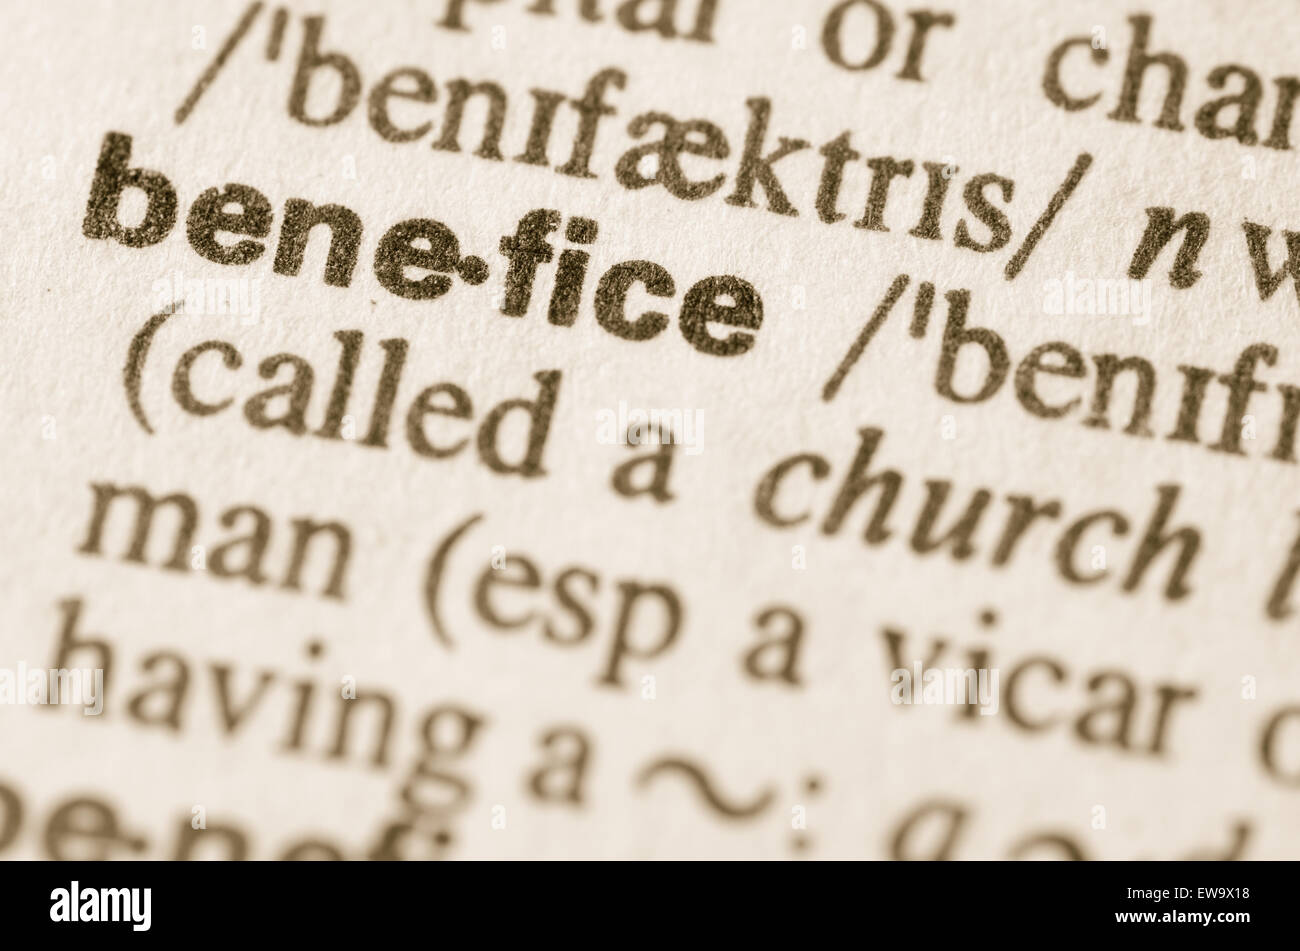 Definition of word benefice in dictionary Stock Photo